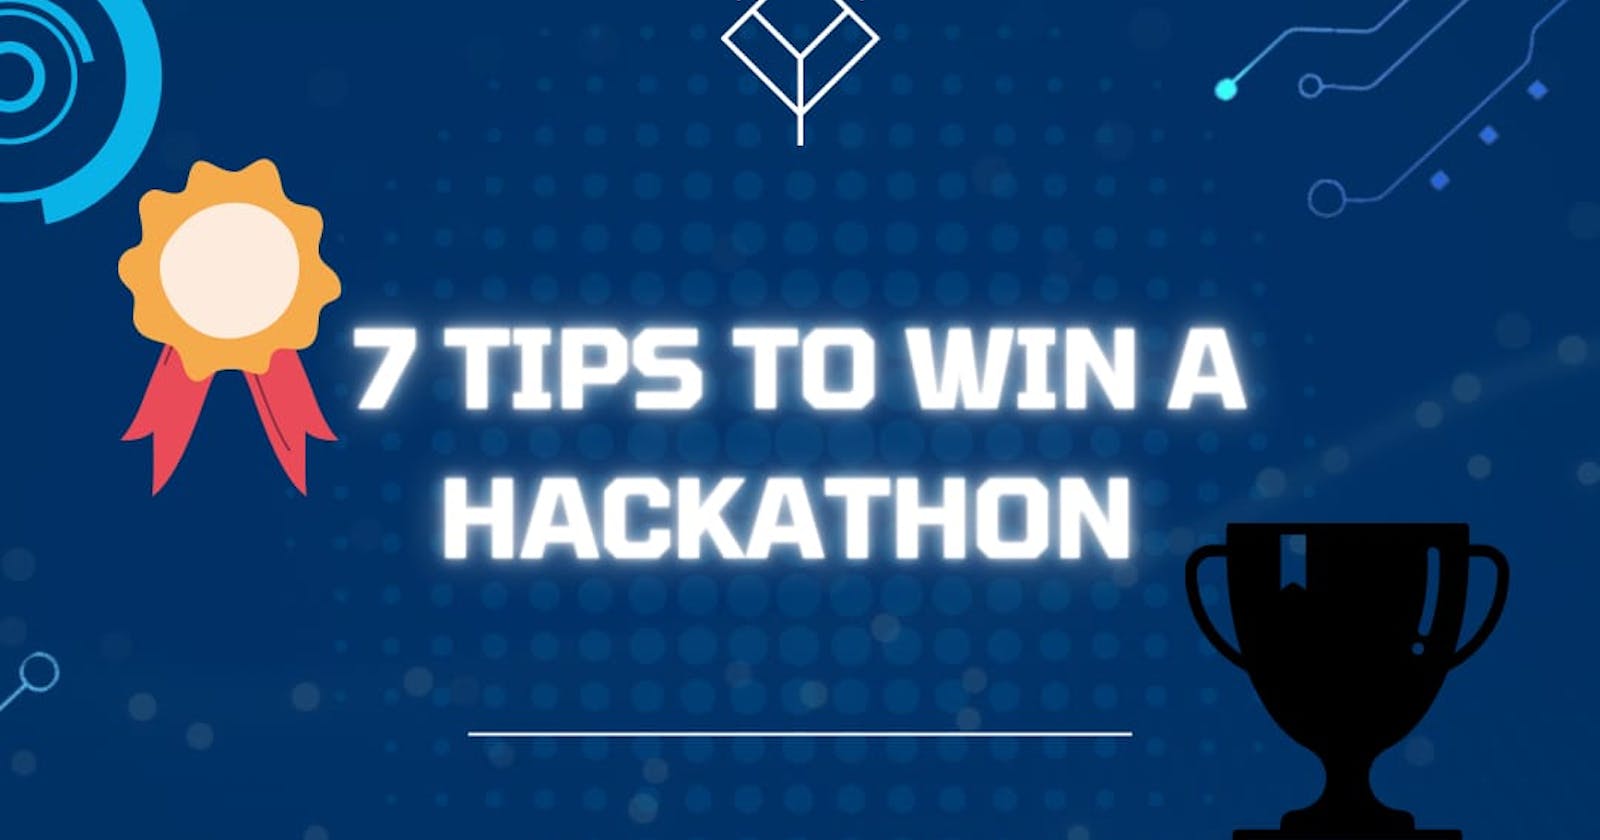 7 Tips to Win a Hackathon